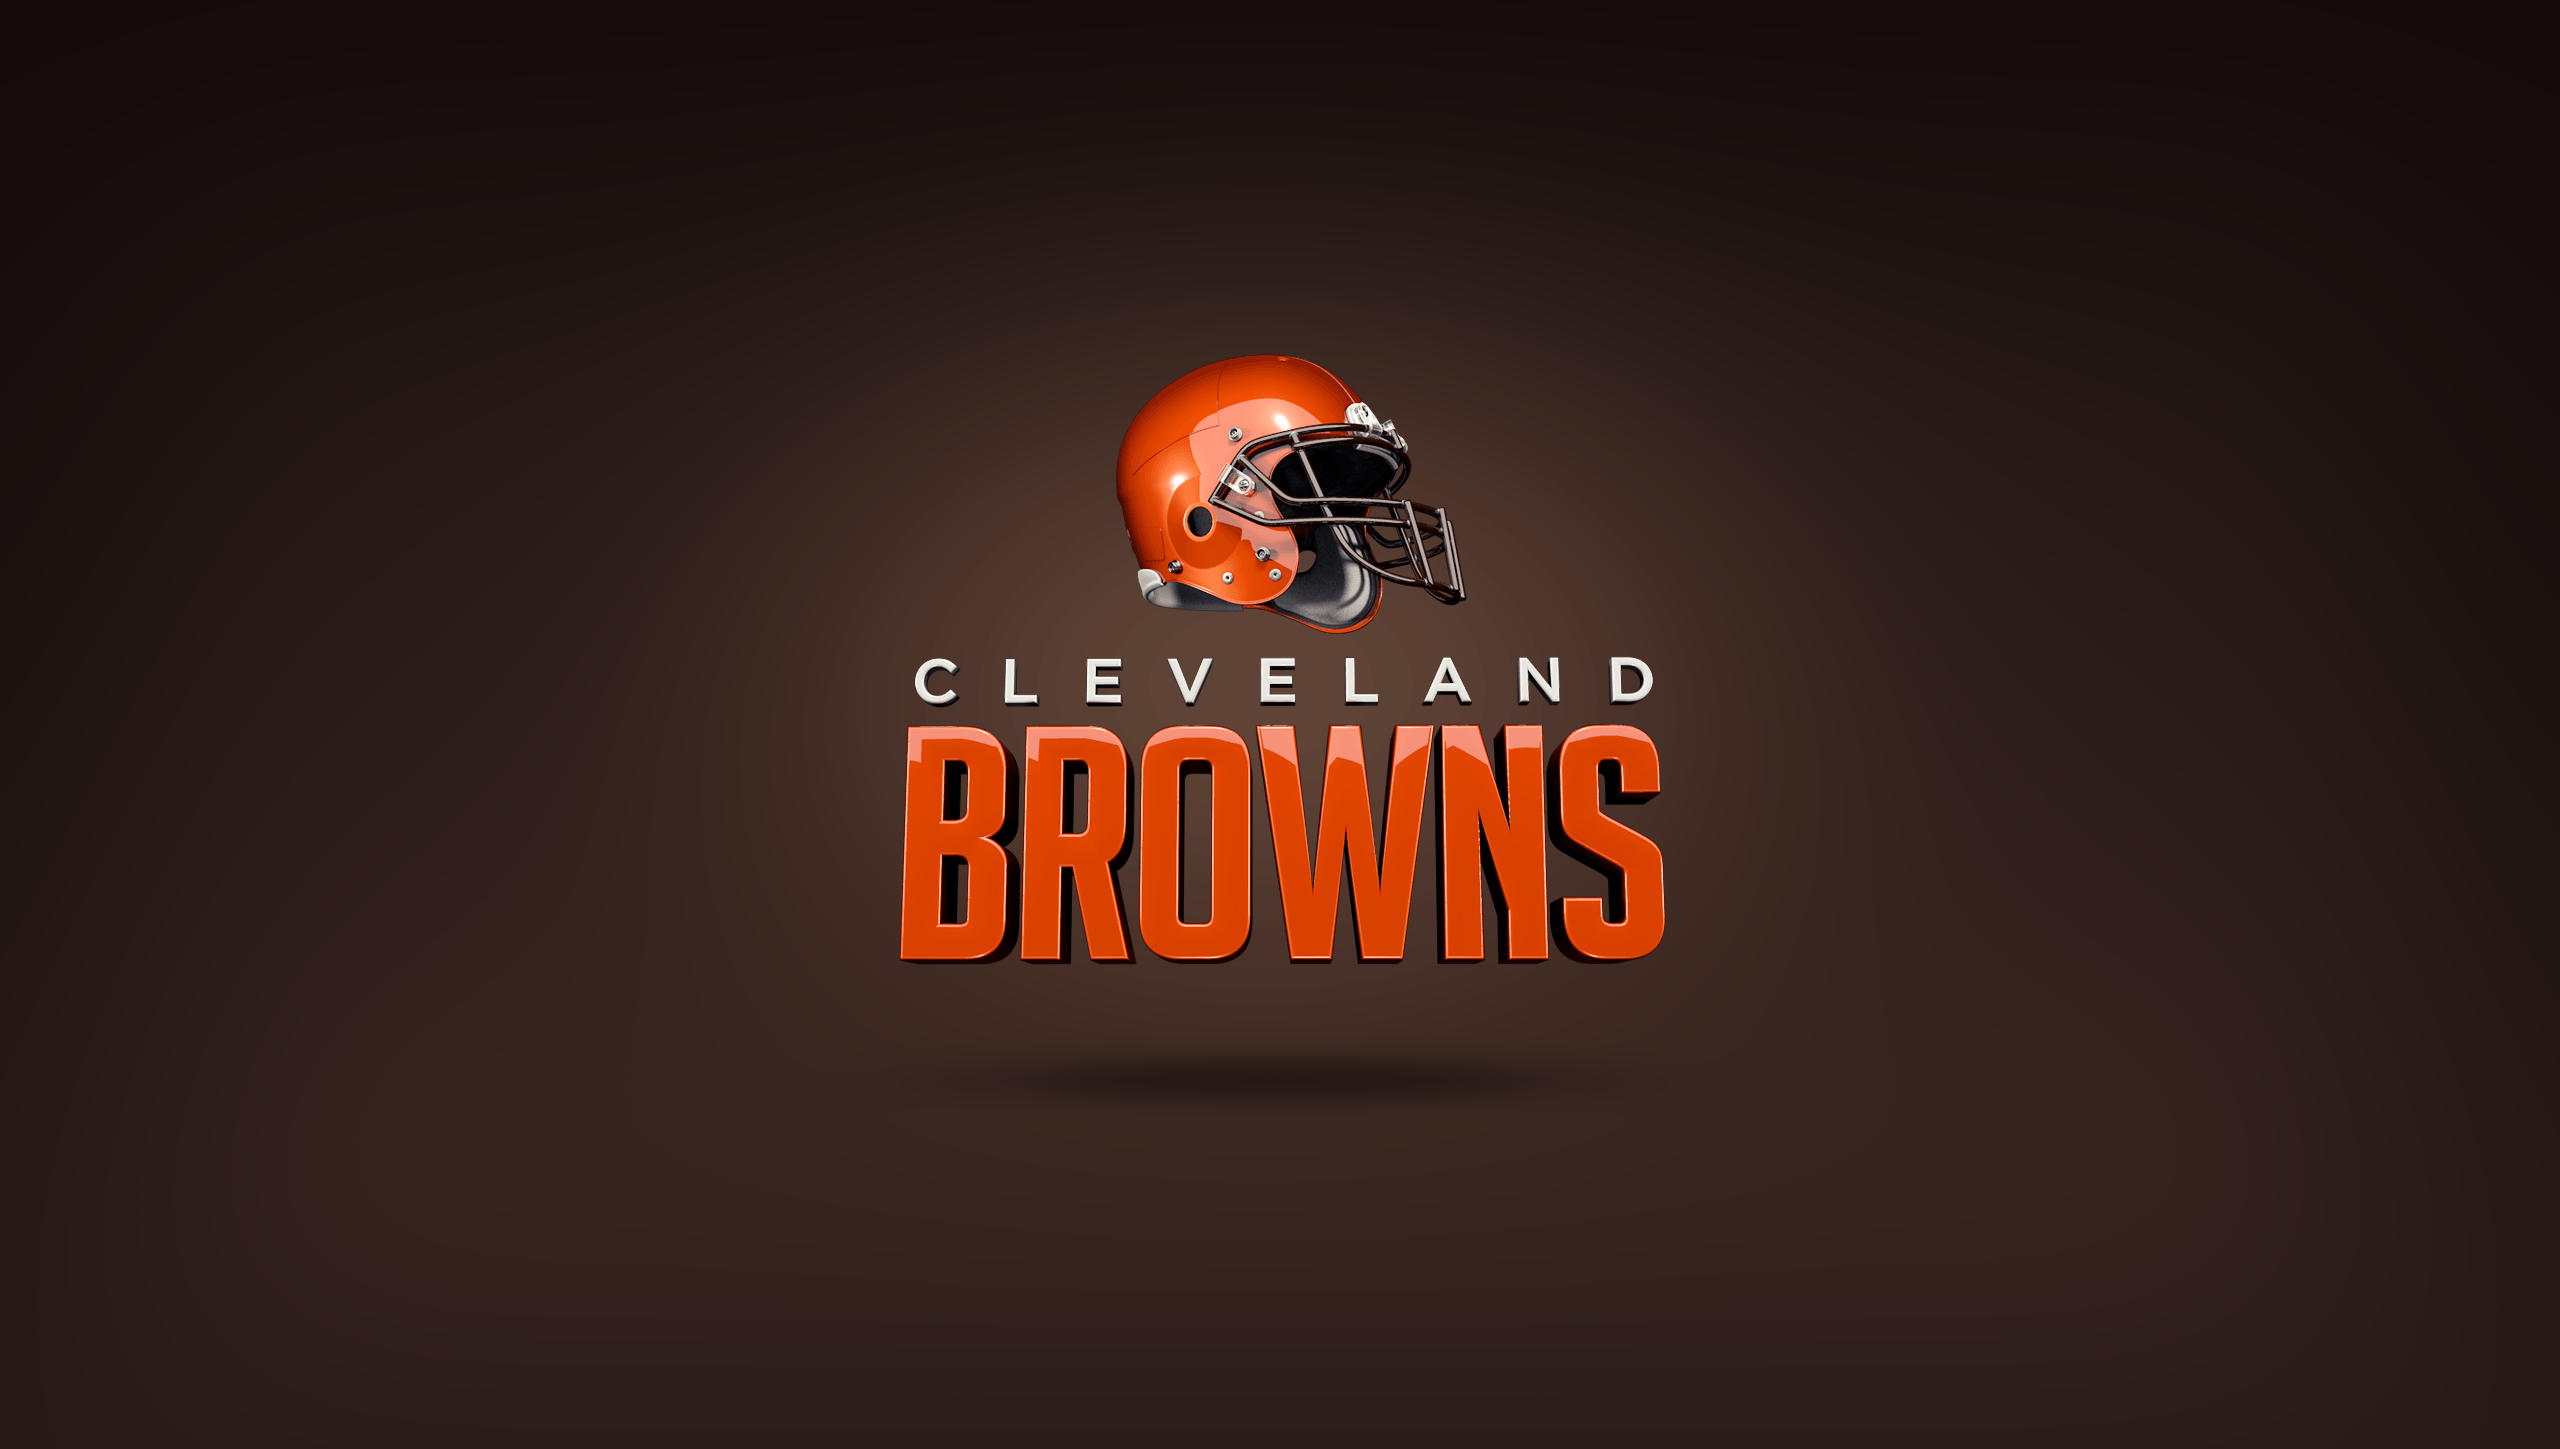 Cleveland Browns Schedule 2016 Wallpapers 2560x1449